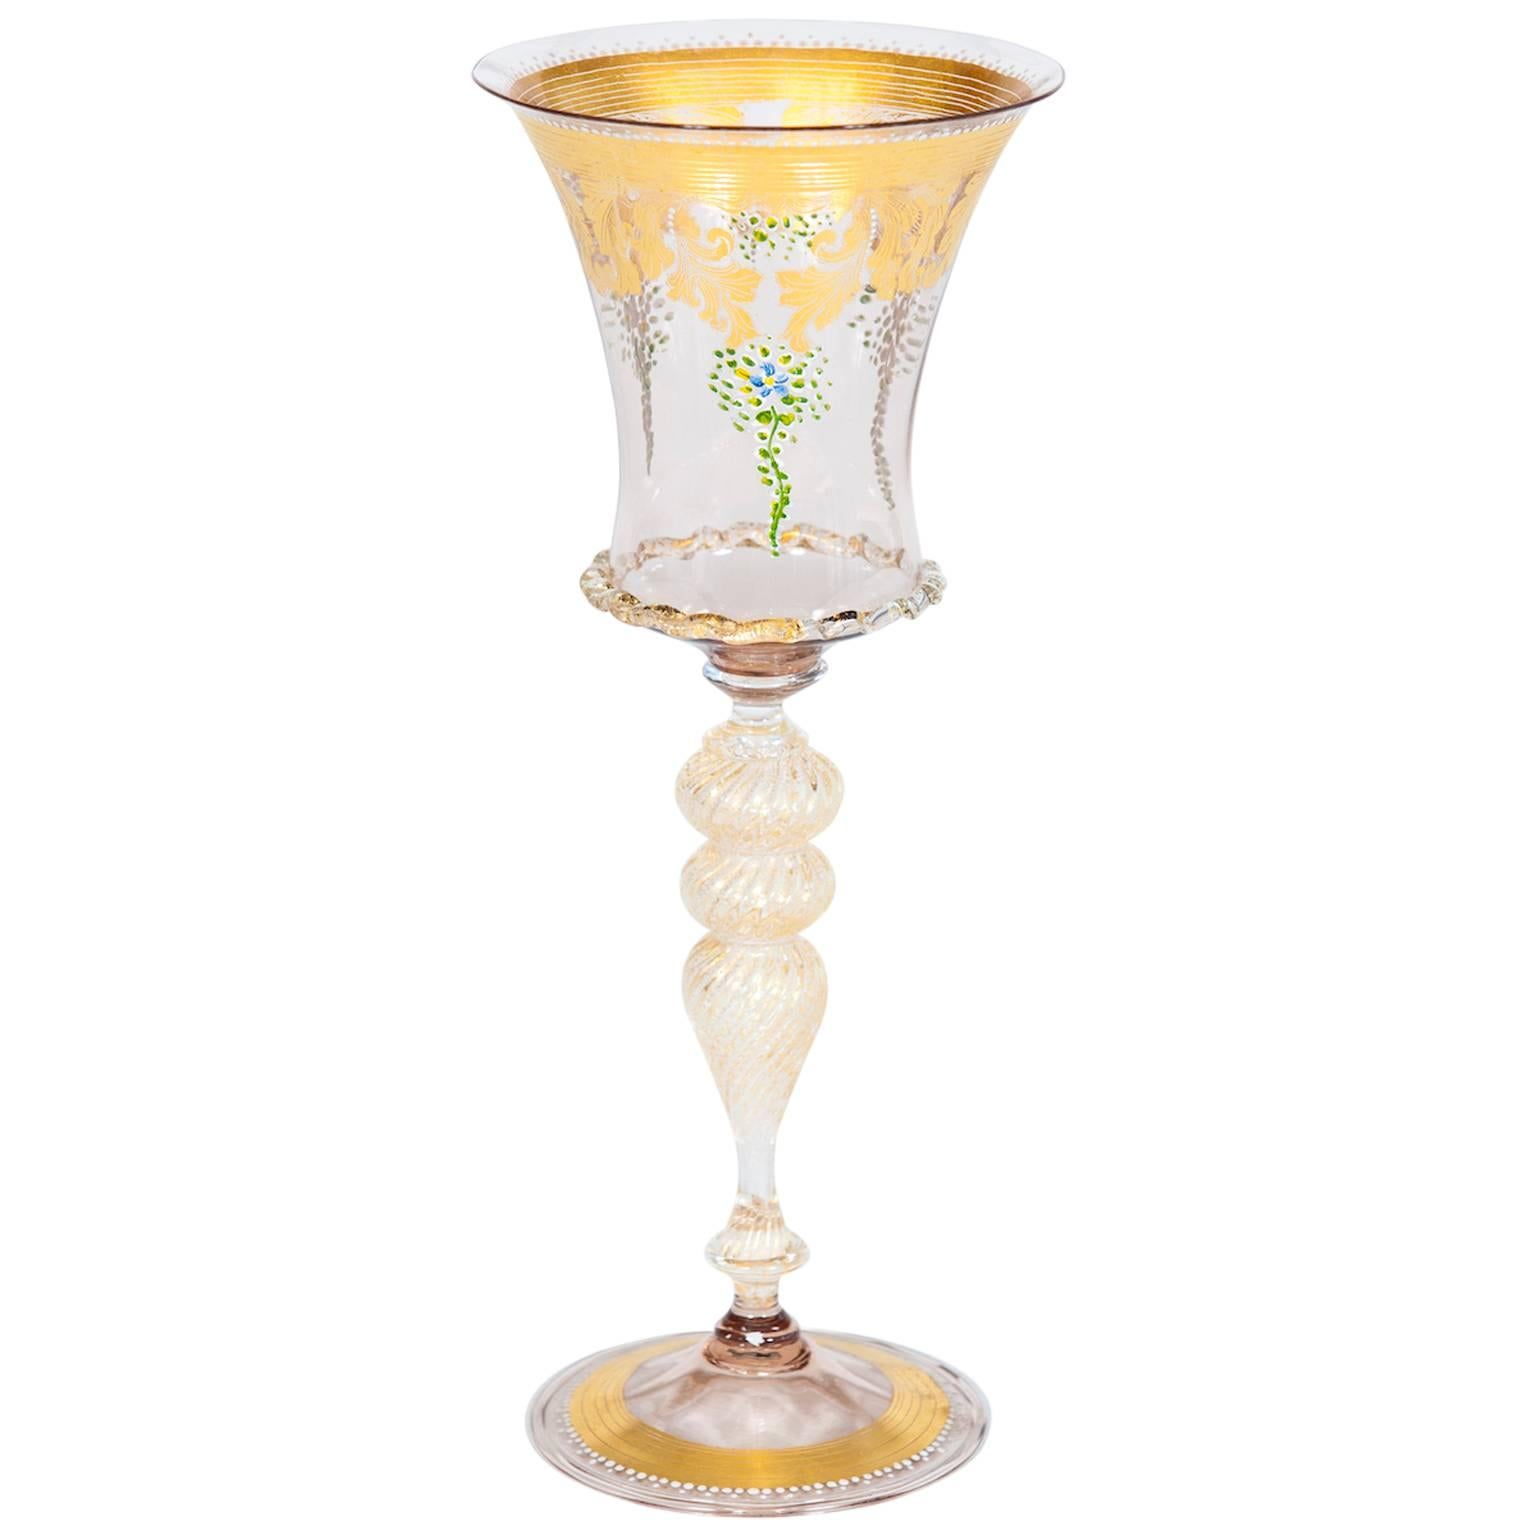 Handcrafted gold glass goblet from 1970s Murano decored with exquisite gold leaf